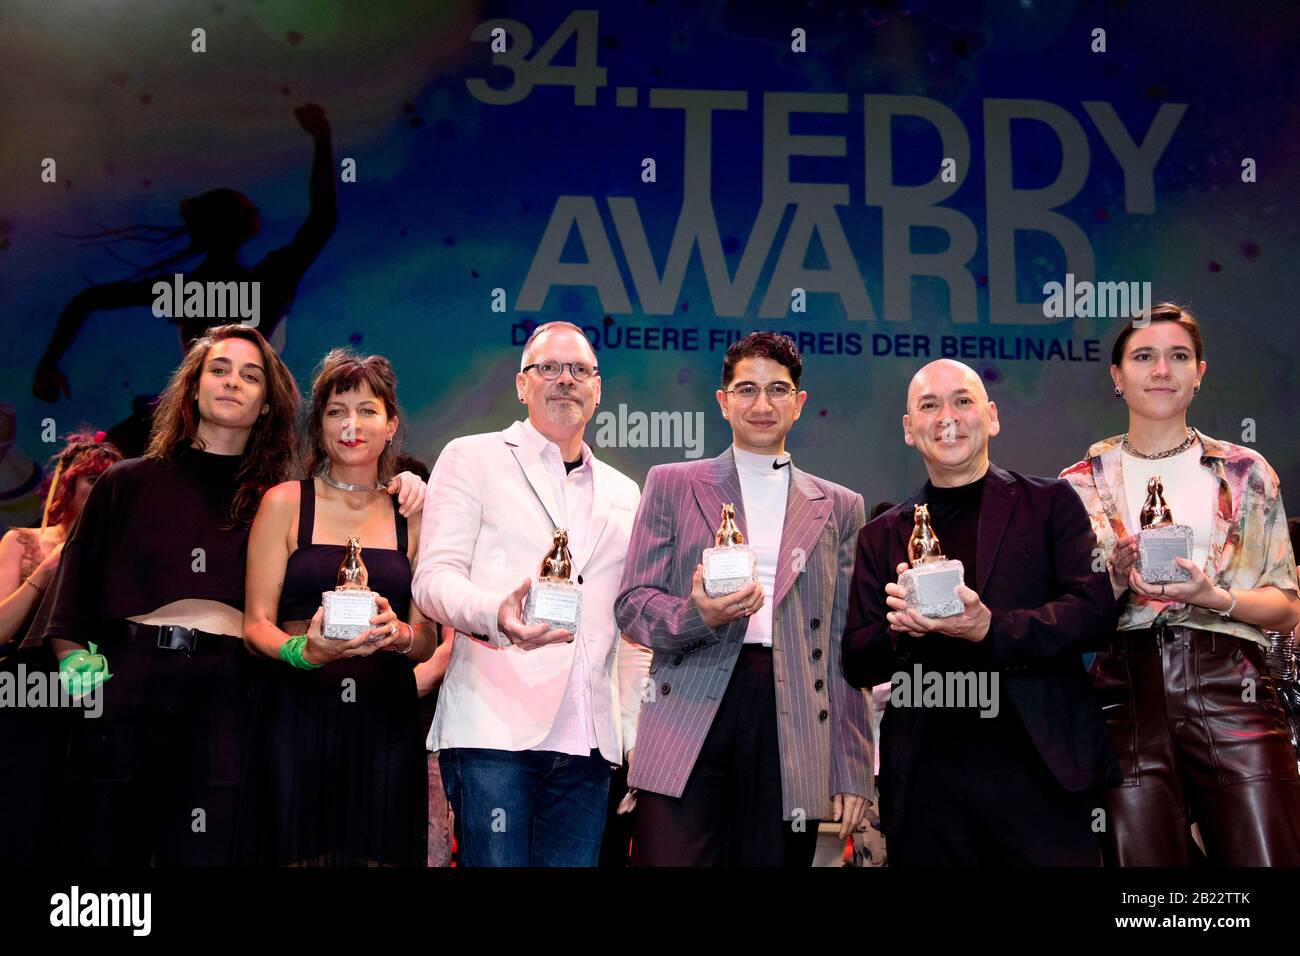 28 February 2020, Berlin: 70th Berlinale, 34th Teddy Award: Producer Magali Merida ('Playback. Ensayo de una despedida', front l-r), Director Agustina Comedi (Best Short Film with 'Playback. Ensayo de una despedida'), director David France ('Activist Award' for 'Welcome to Chechnya'), director Faraz Shariat (Best Feature Film and 'Readers' Award' for 'Future Three'), director Tsai Ming-liang ('Teddy Jury Award' for 'Rizi') and co-author Paulina Lorenz ('Future Three'). The queer film prize has been awarded at the Berlinale since 1987. The International Film Festival takes place from 20.02. to Stock Photo